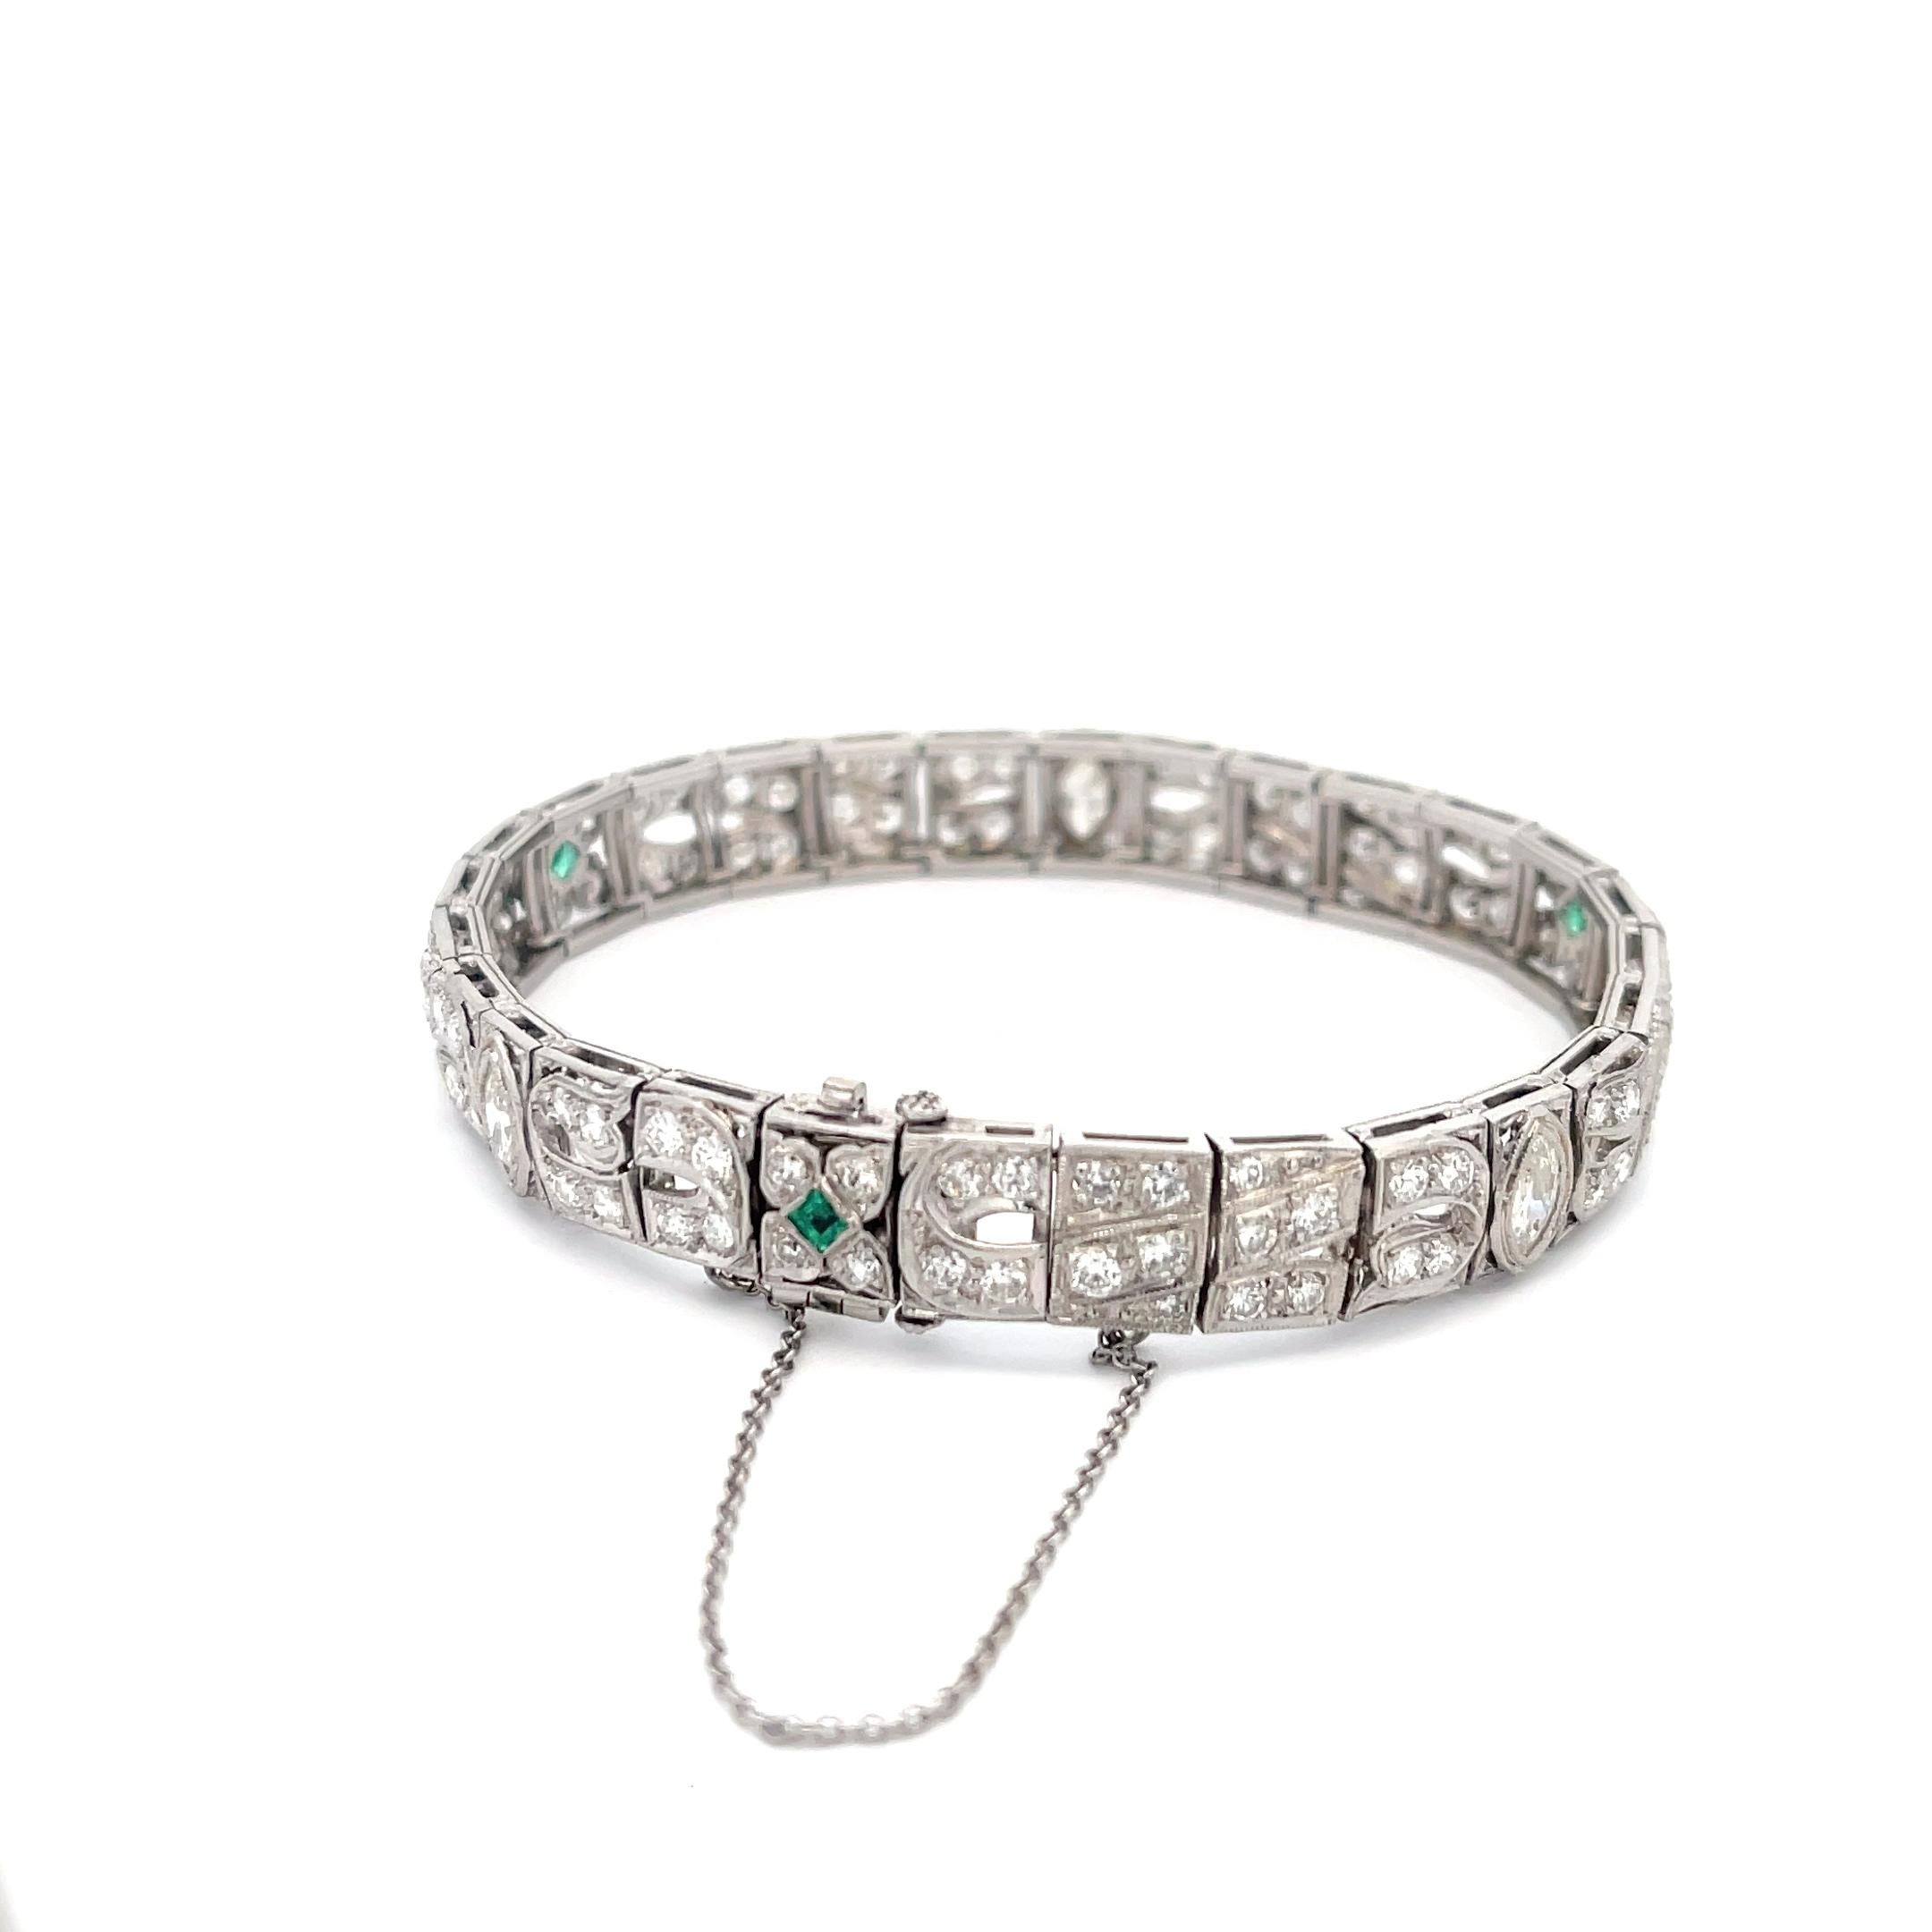 Diamond and Emerald Bracelet in Platinum. The bracelet features 1.08ctw of round and marquise diamonds and 0.12ctw of square cut emeralds. The bracelet is 7 inches long, 8.6mm wide, and weighs 30.3 grams.